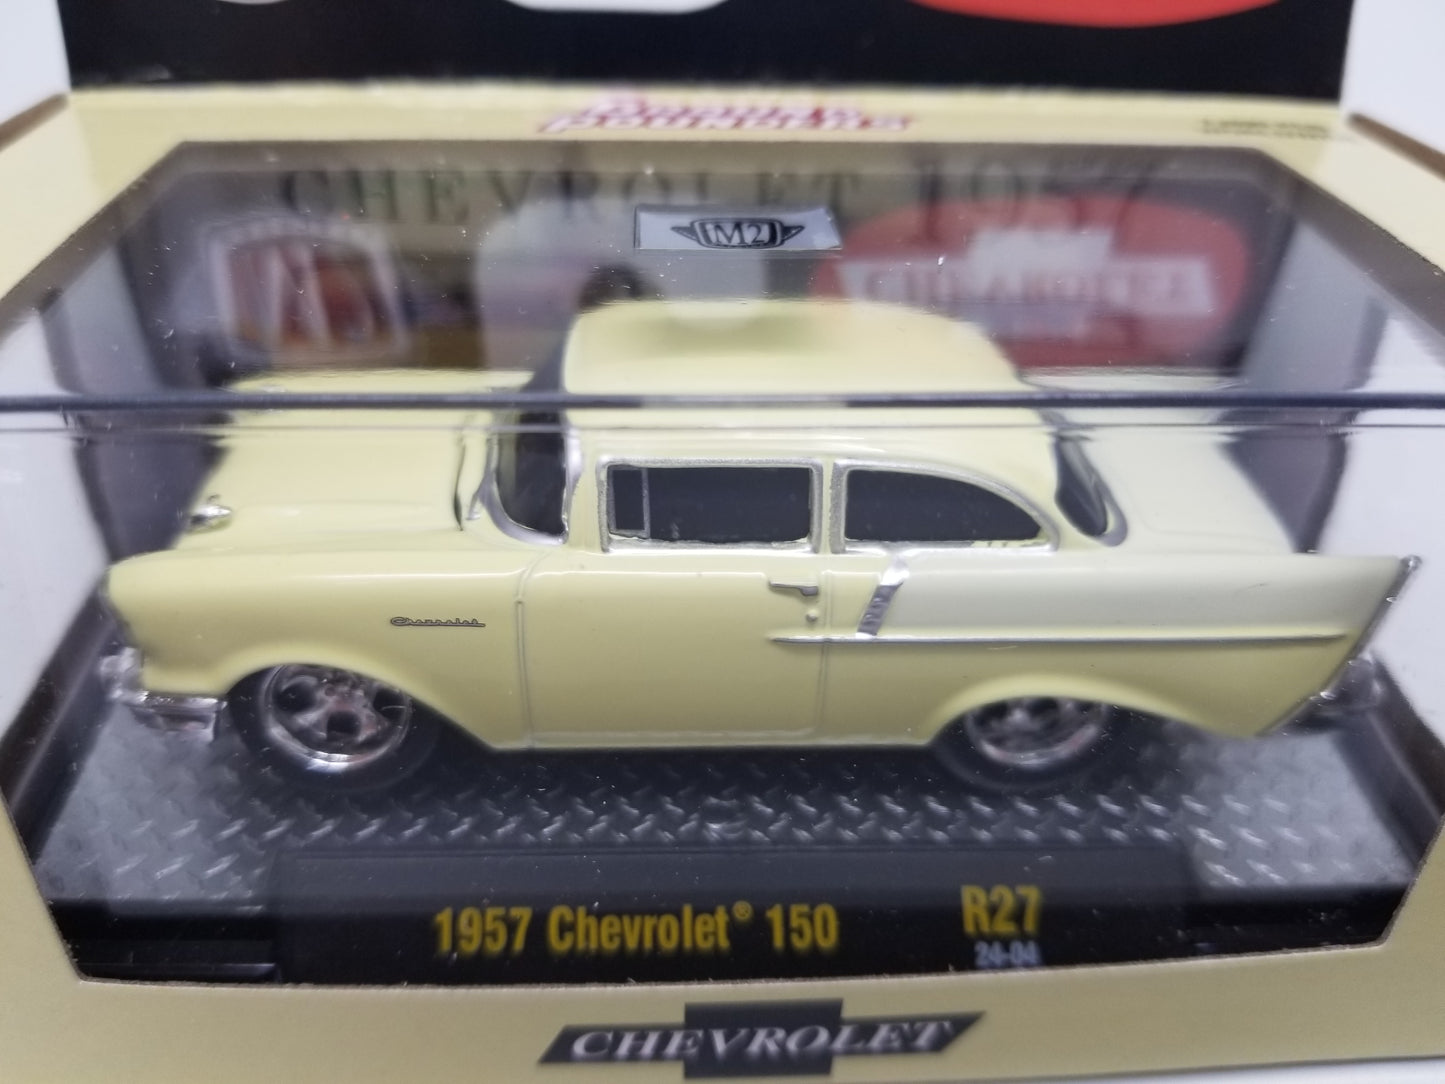 M2 1957 Chevrolet 150 - Ground Pounders